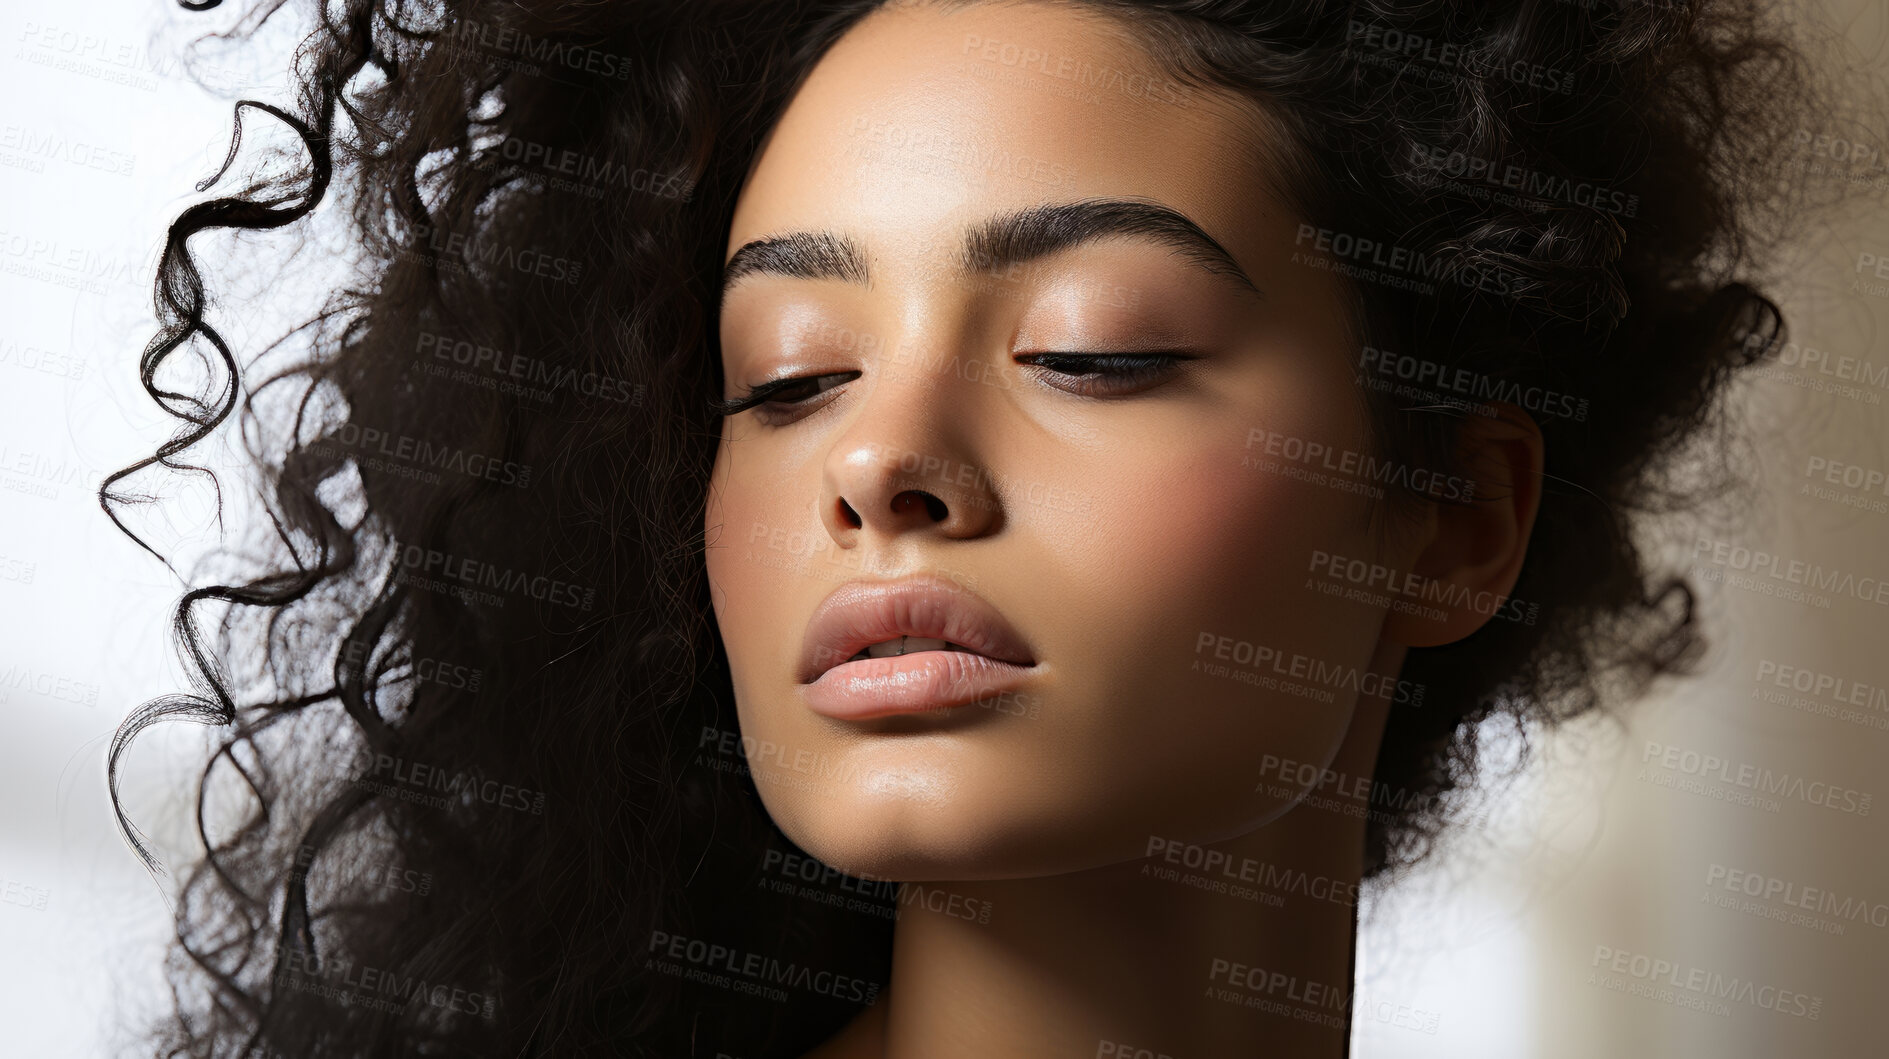 Buy stock photo Close-up of model. Make-up, smooth skin, curly hair. Fashion, editorial concept.